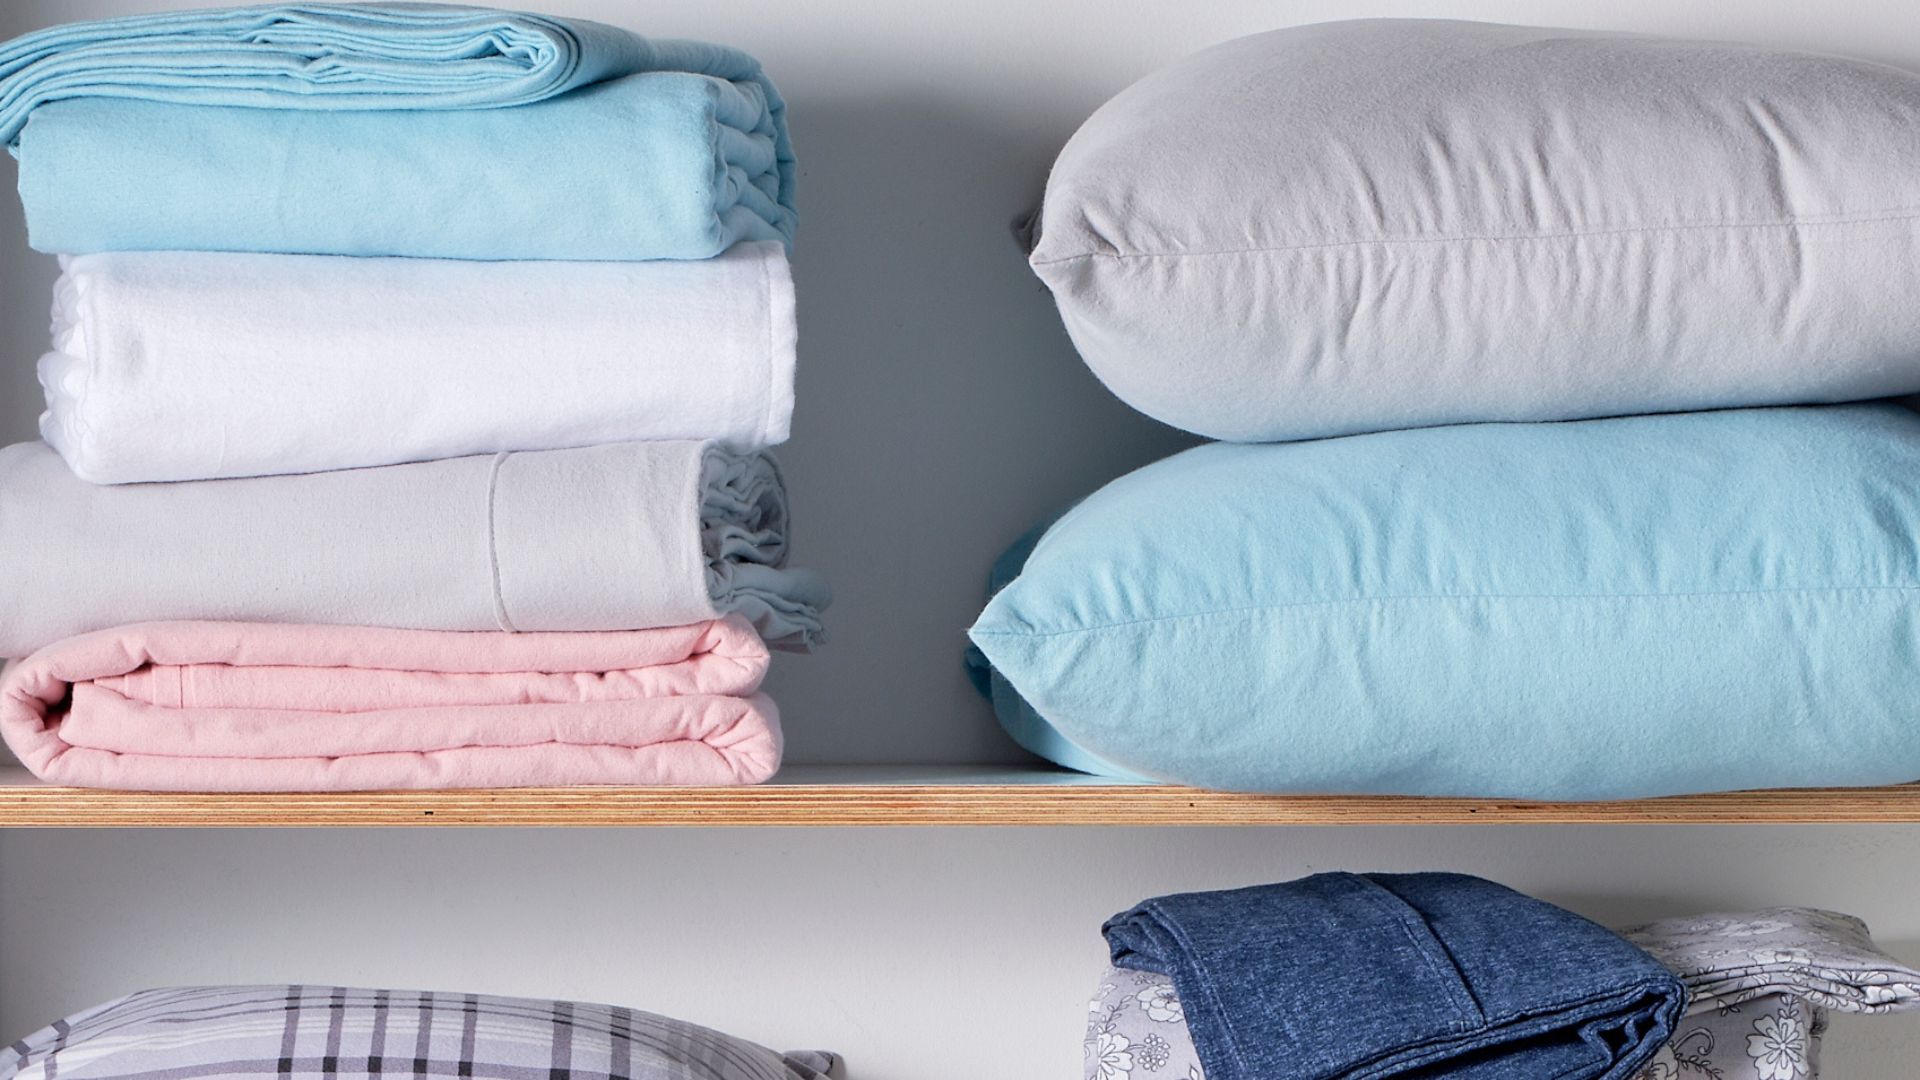 Folded bed sheets and pillows in storage